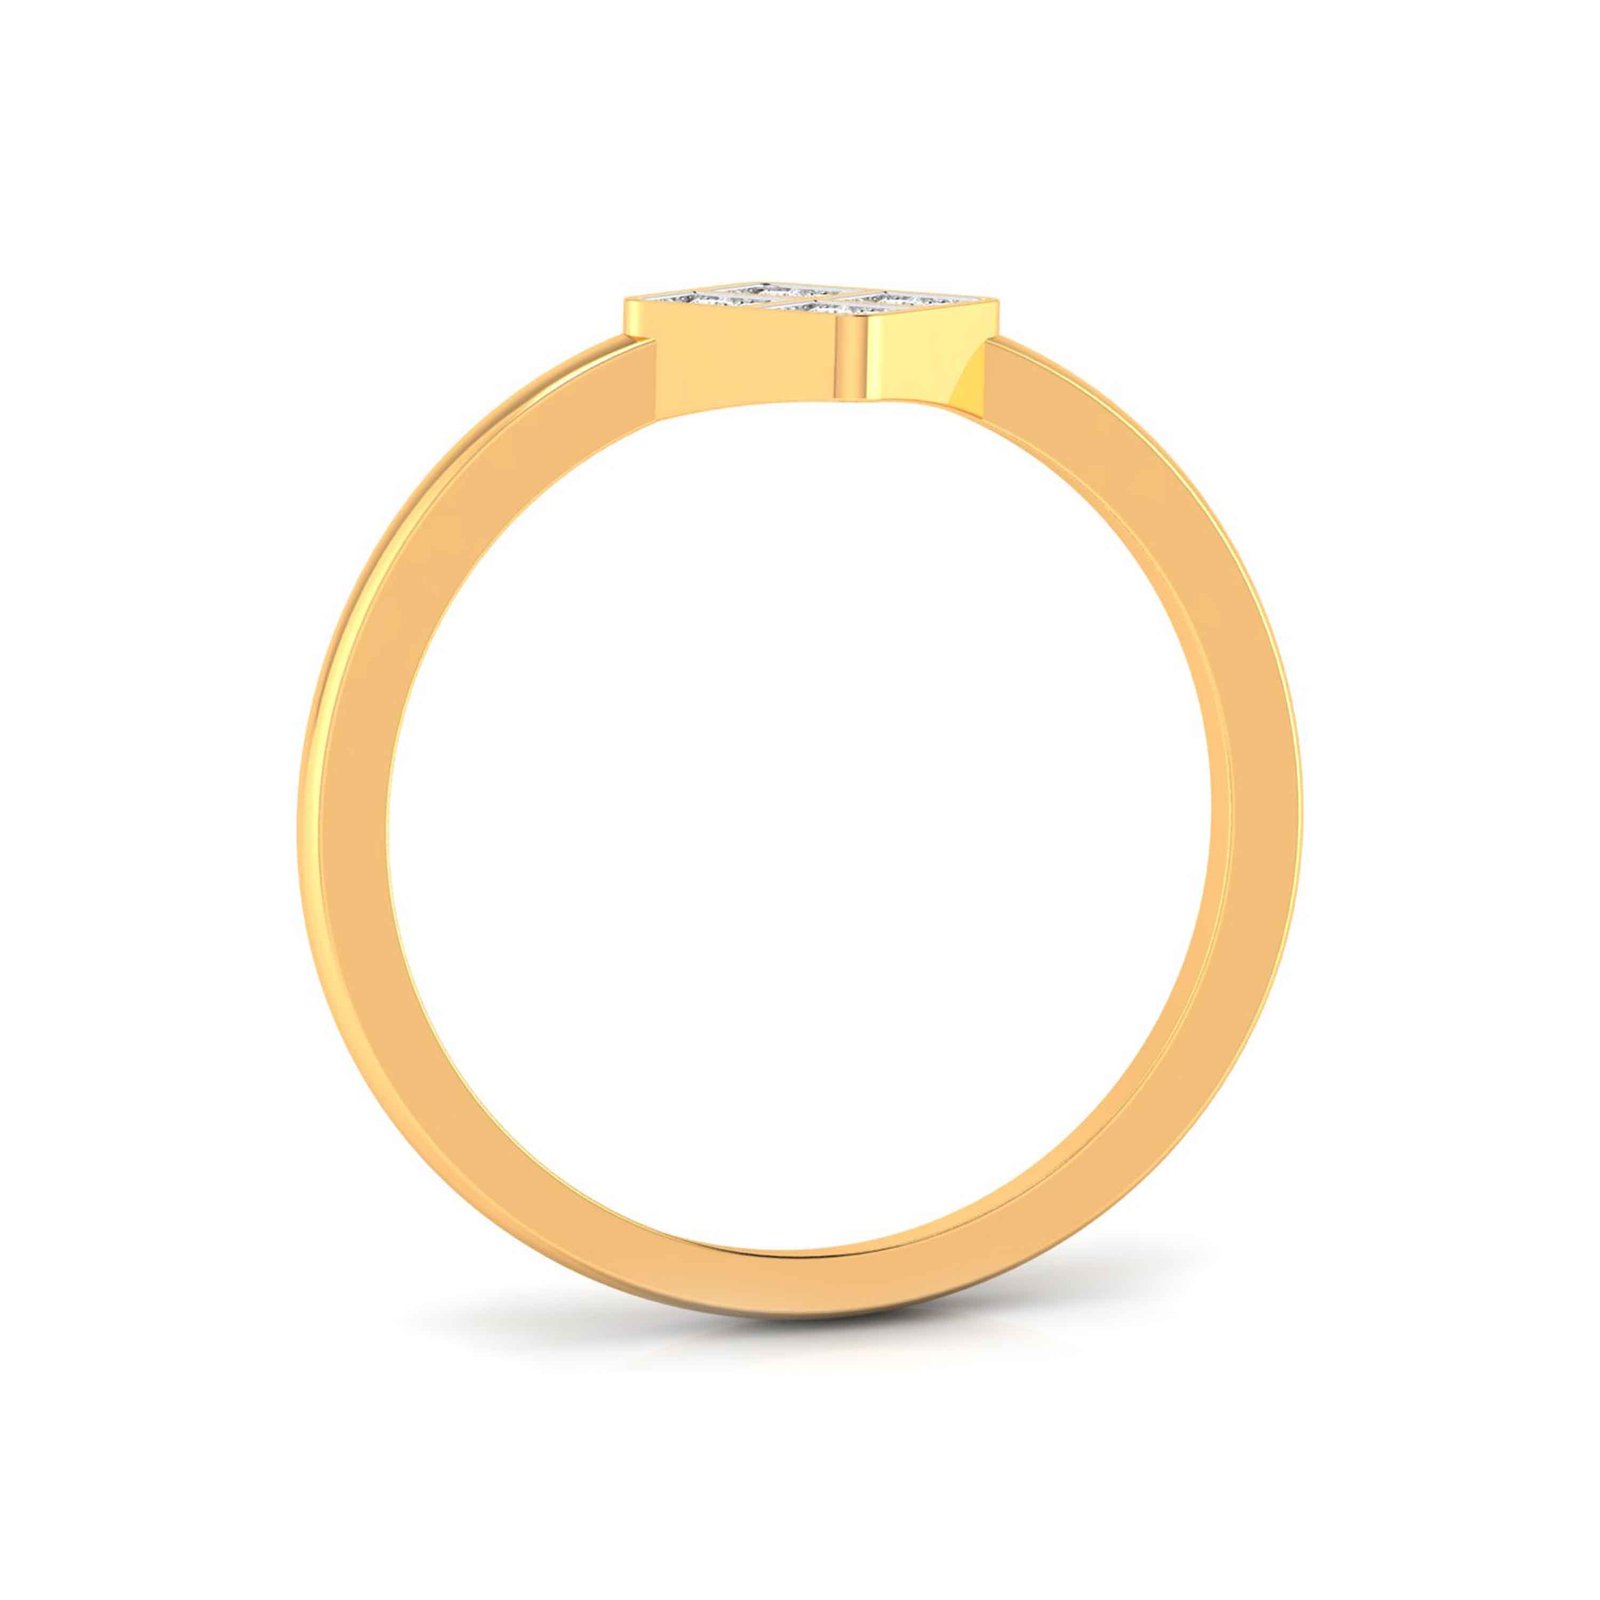 Tilted Cubic Diamond Ring In Pure Gold By Dhanji Jewels